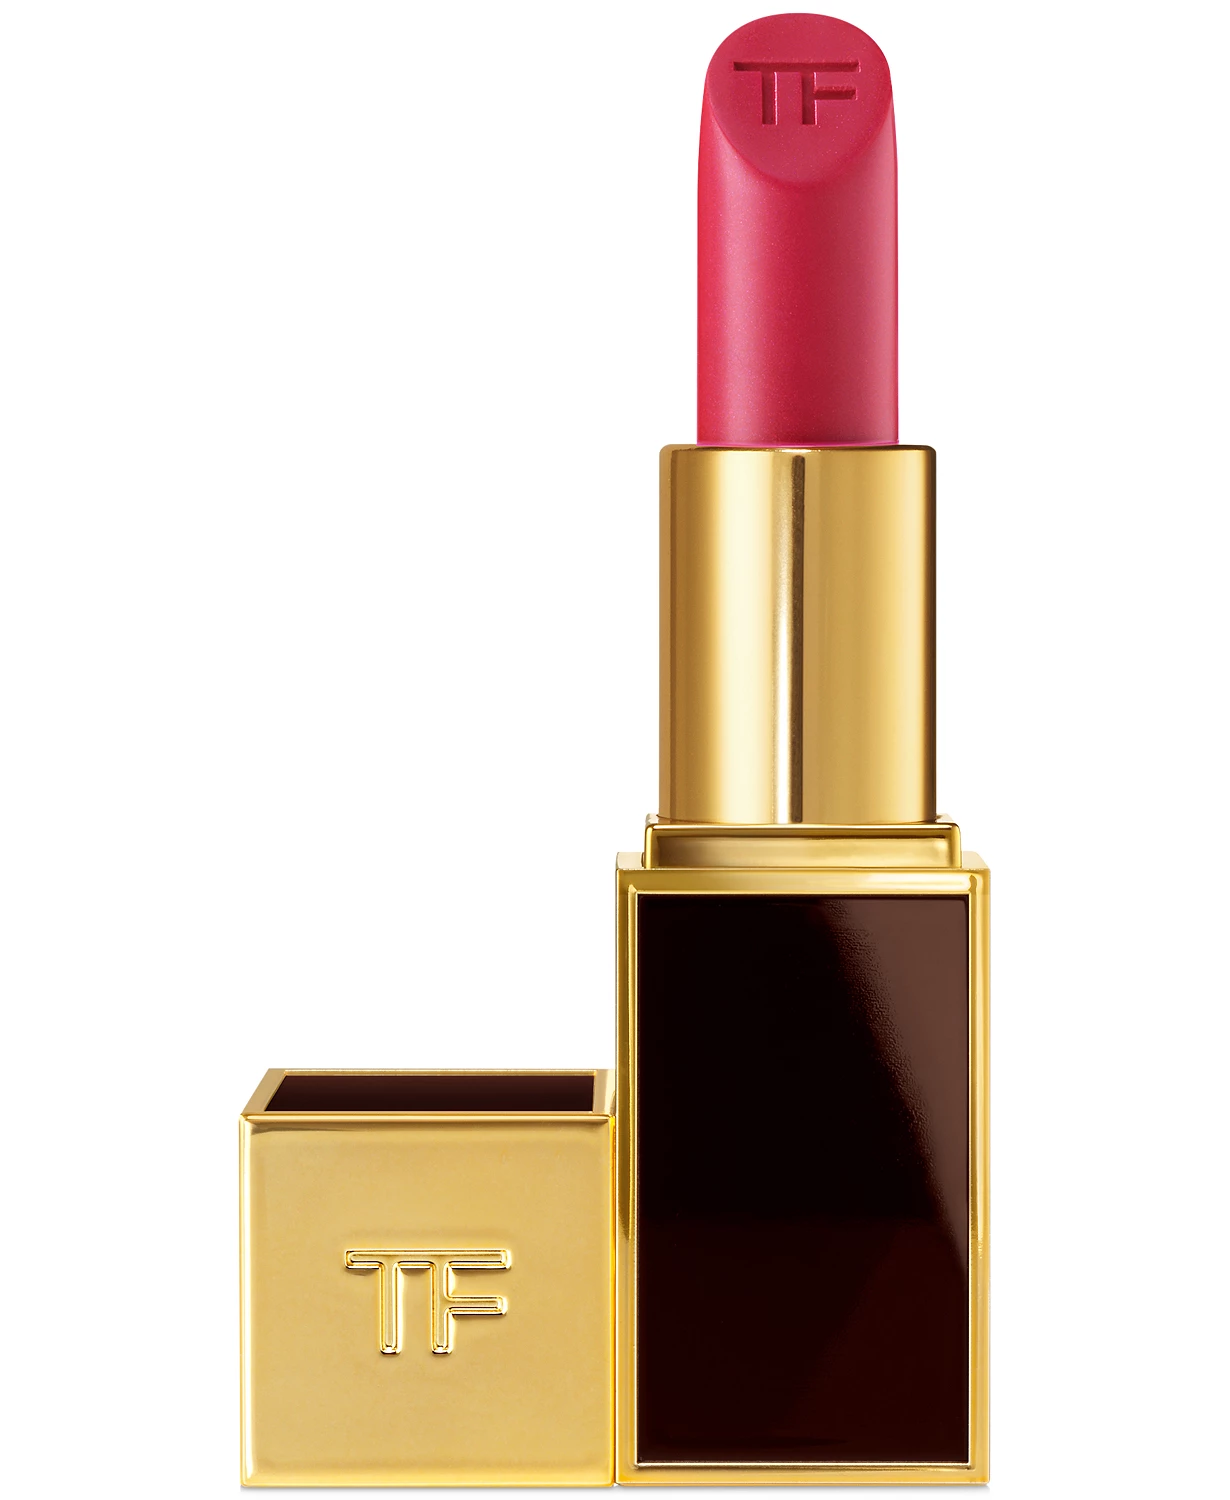 50% Off Tom Ford Cosmetics + Deluxe Sample $29.00